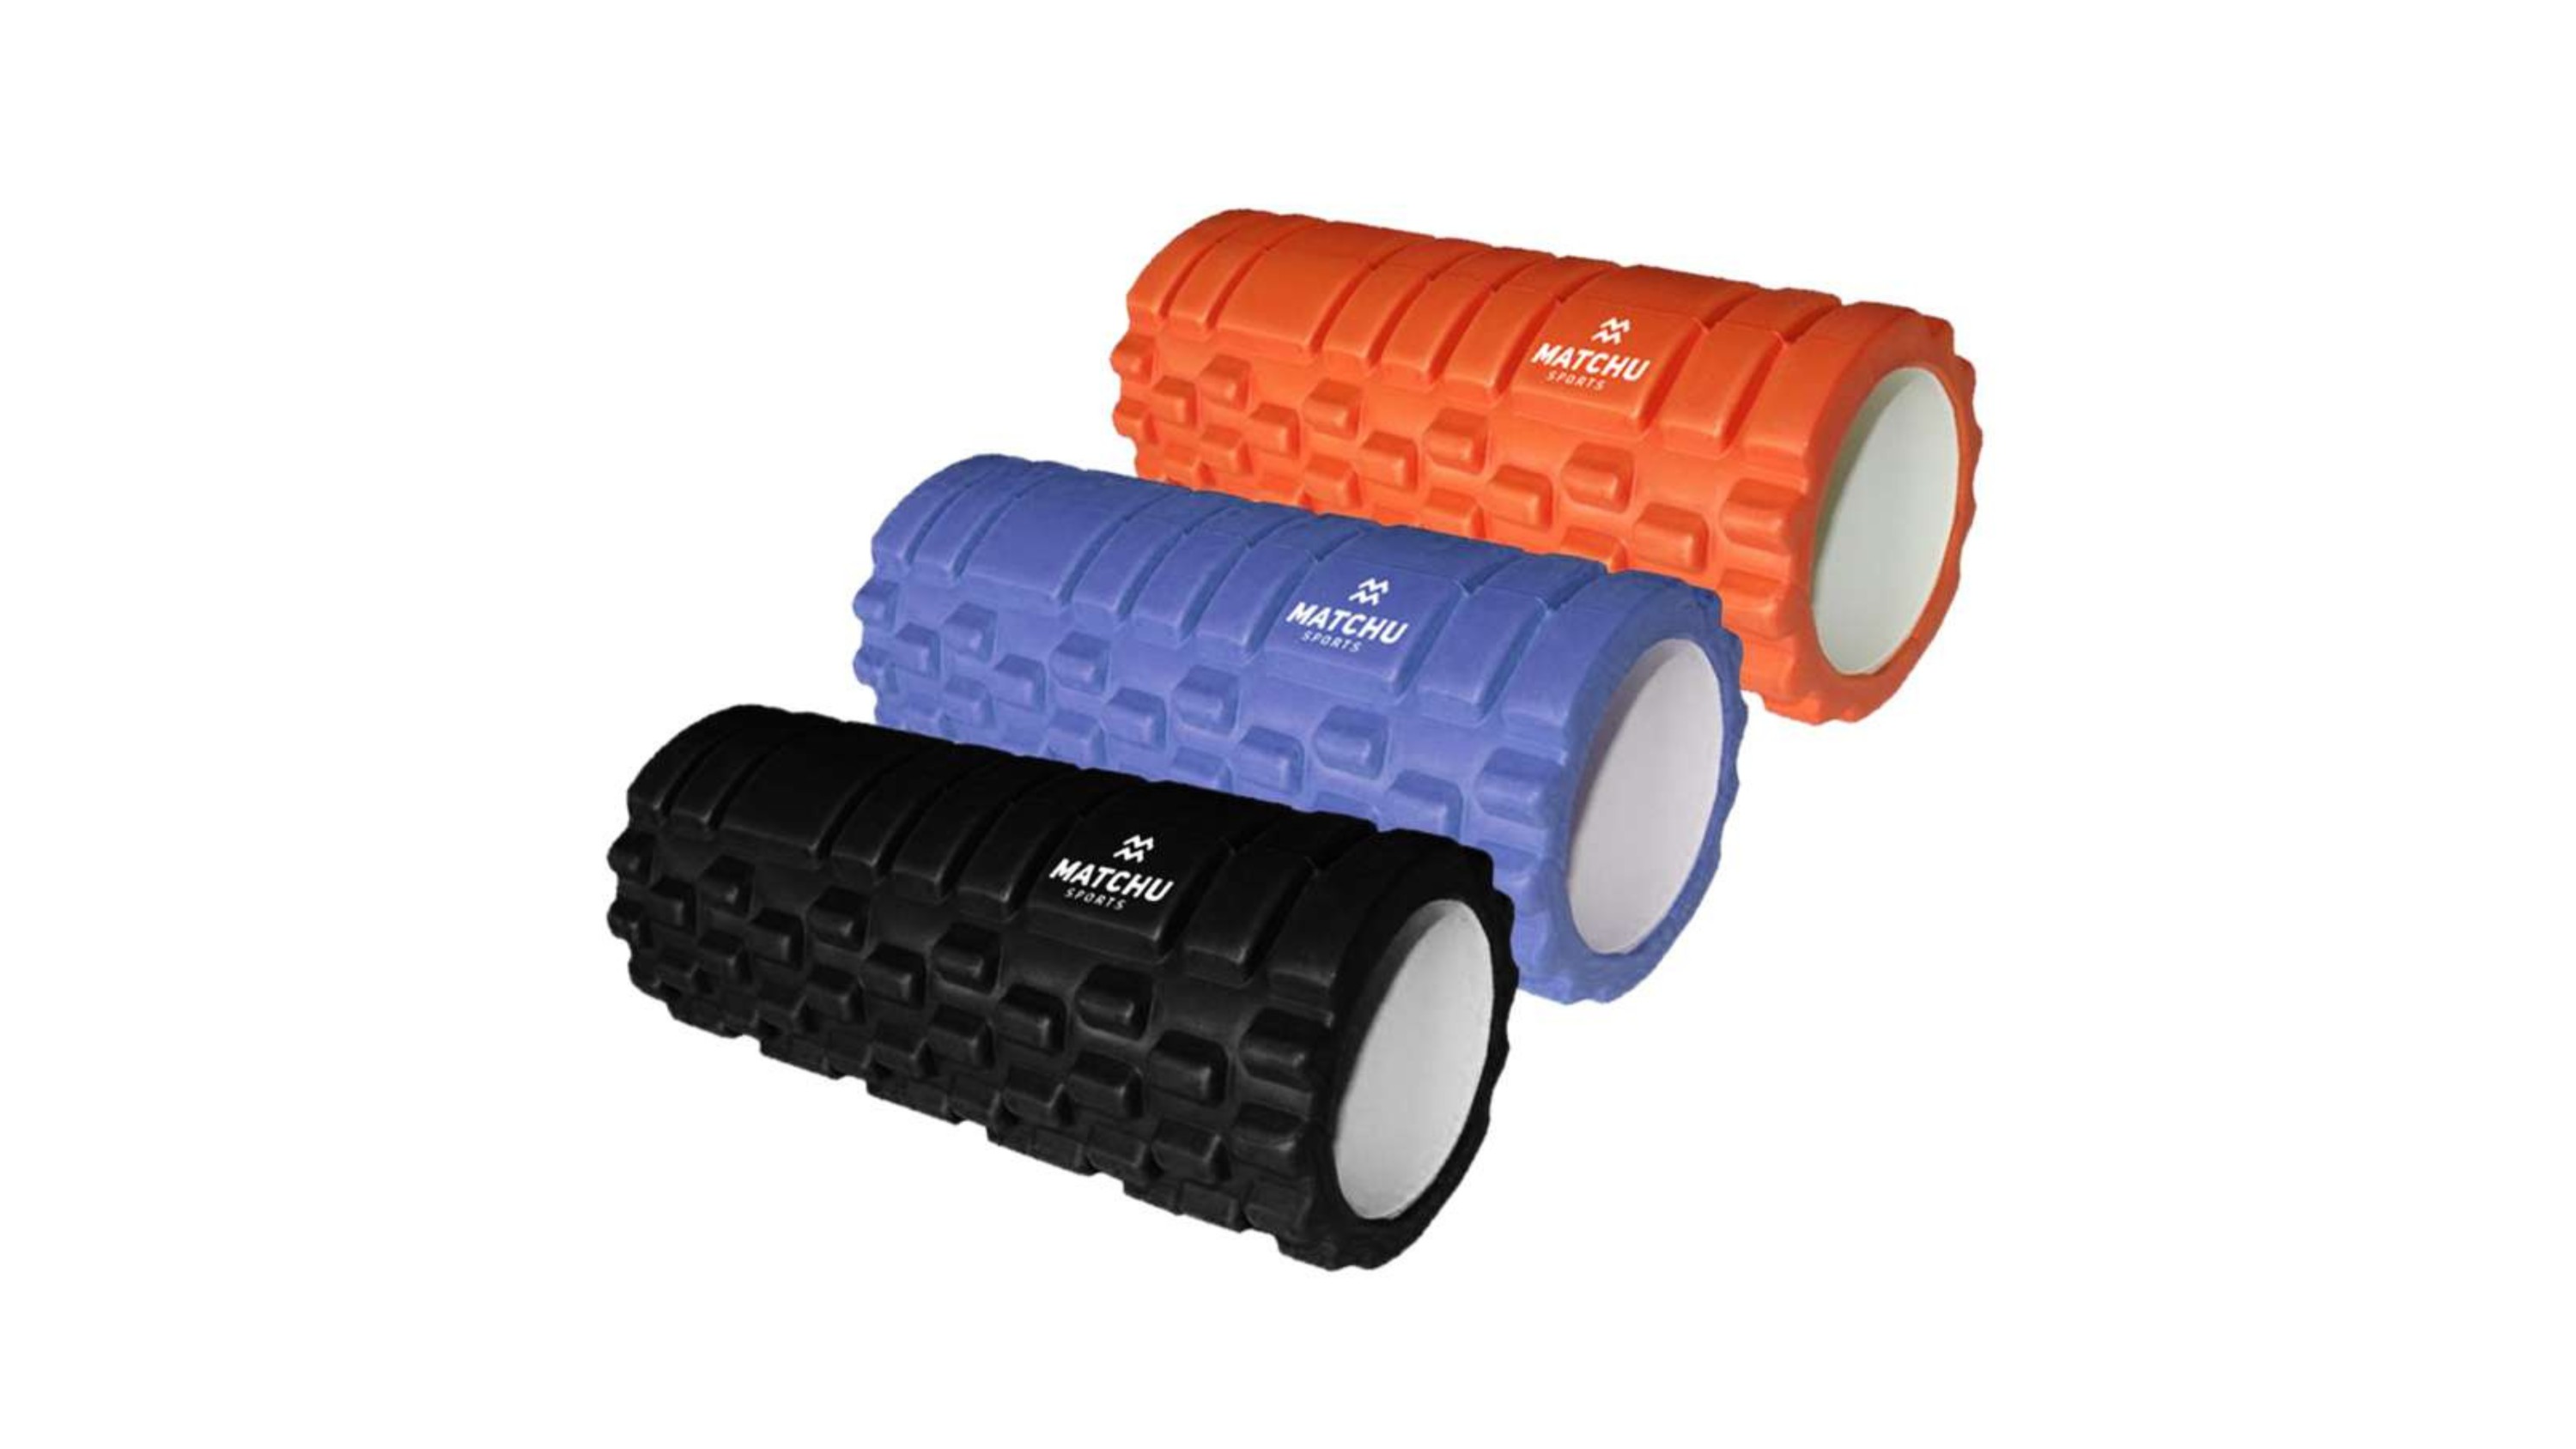 With this foamroller you reduce stiffness of various muscles.